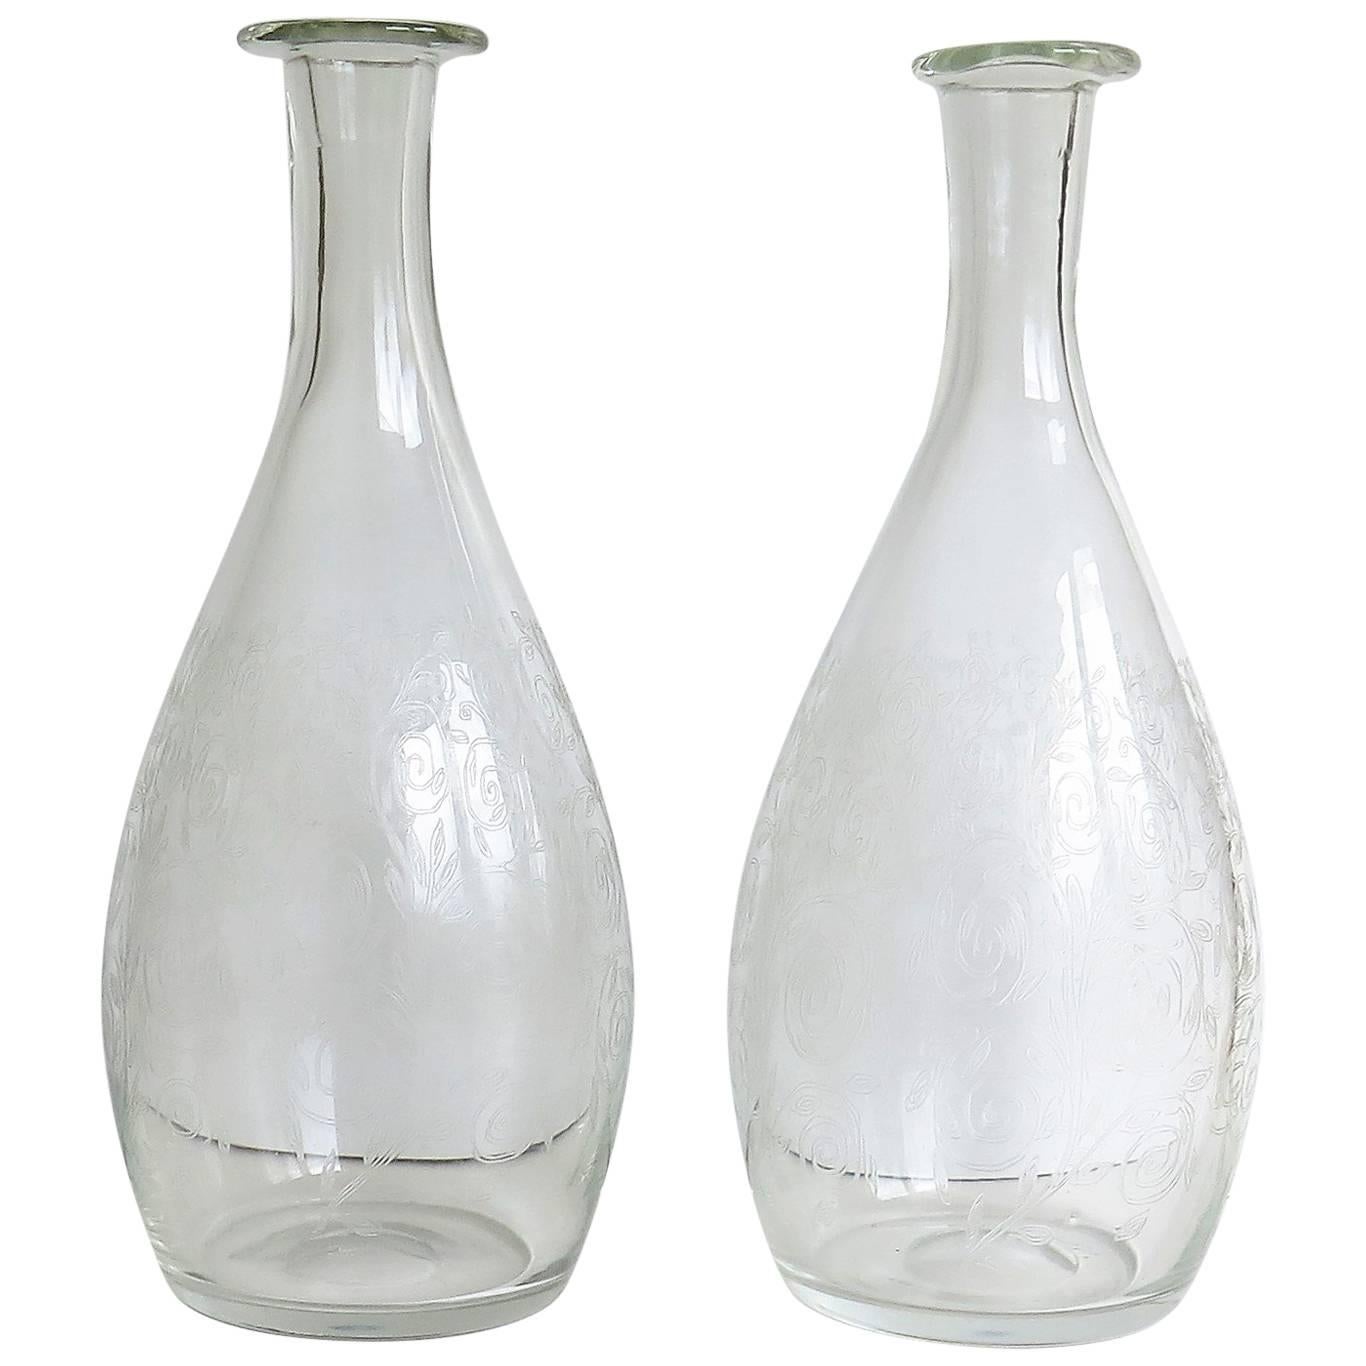 These are a fine pair of hand blown, English, lead crystal glass carafes, decanters or bottle vases dating to the 19th century.

The carafes are bottle shaped, tapering to the neck with nicely lipped rims. They have ground out pontil marks to the